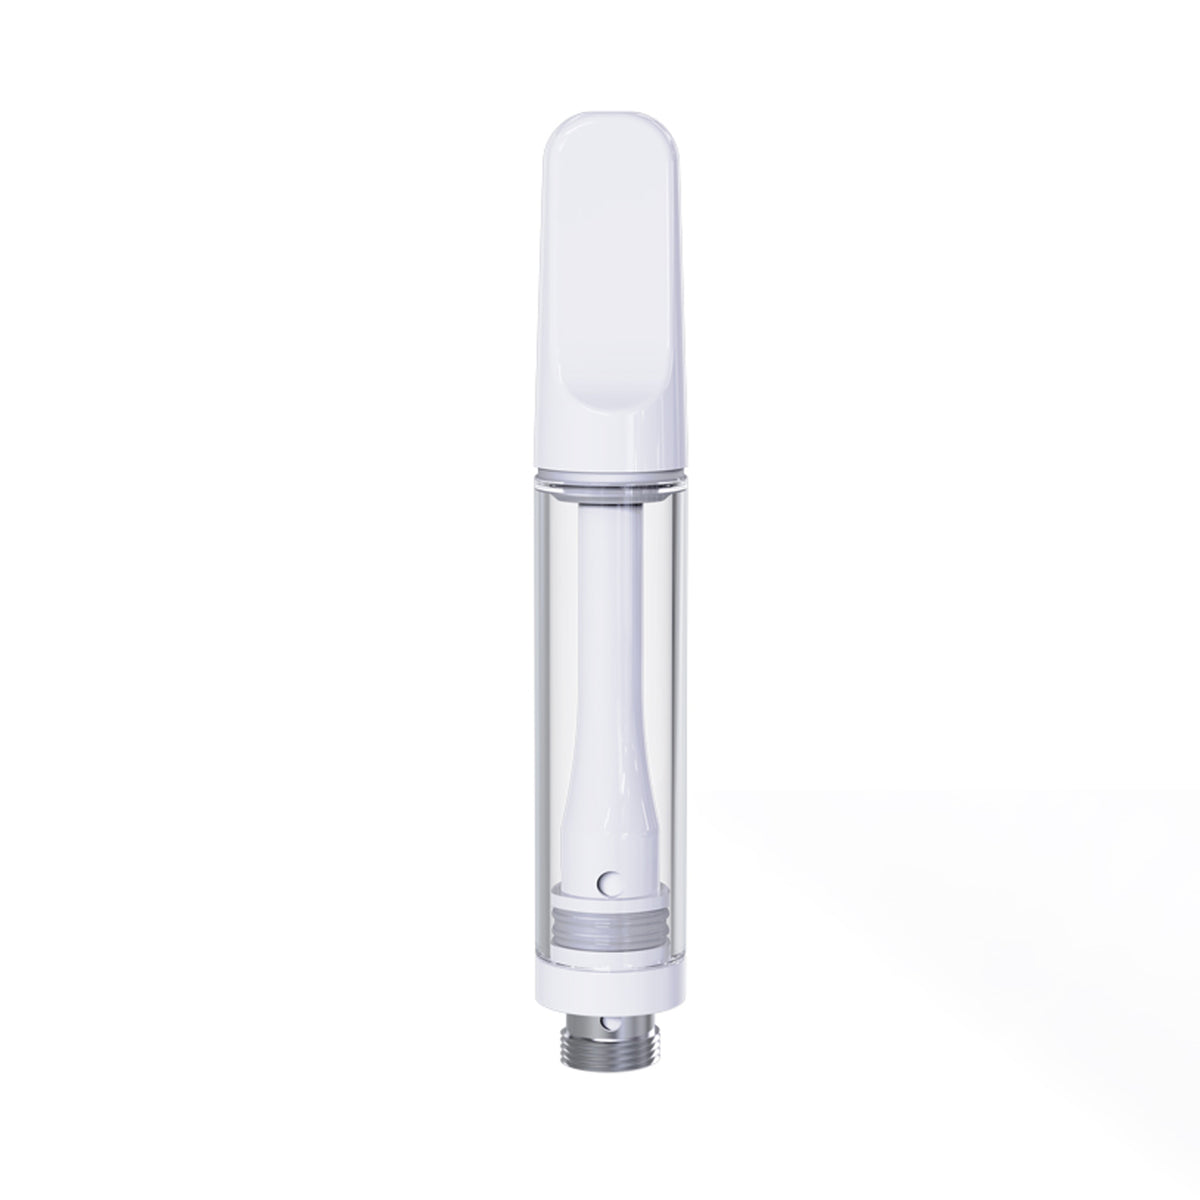 V22 Full Ceramic Cartridge features Buddy’s patented ceramic cell technology with ceramic pole, tip and glass tube for your best vaping experiences.